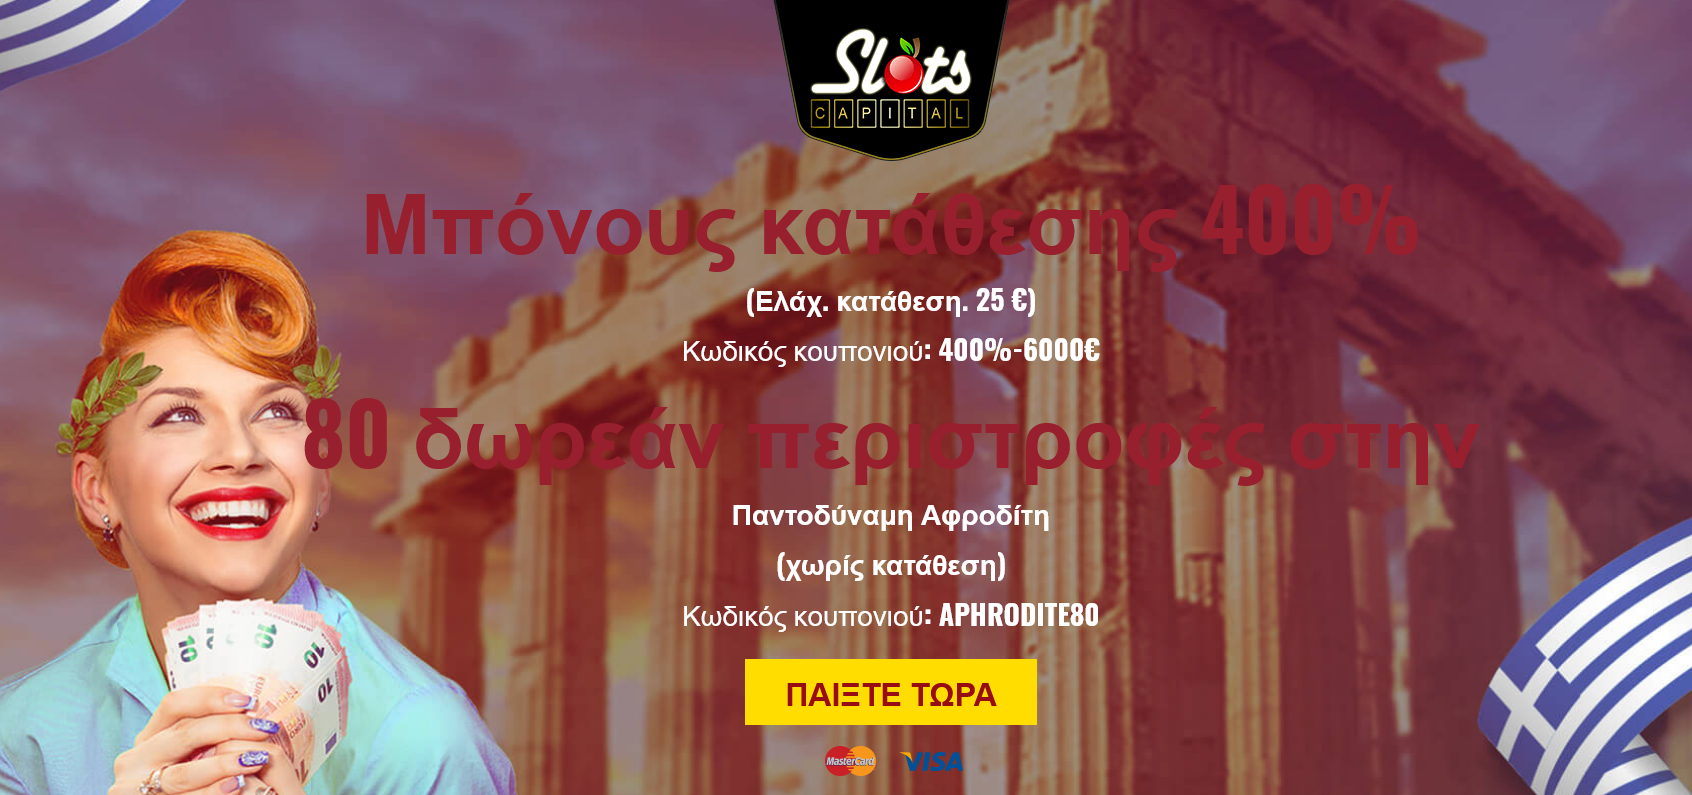 Slots Capital GR 80 Free Spins
                                  (Greece)